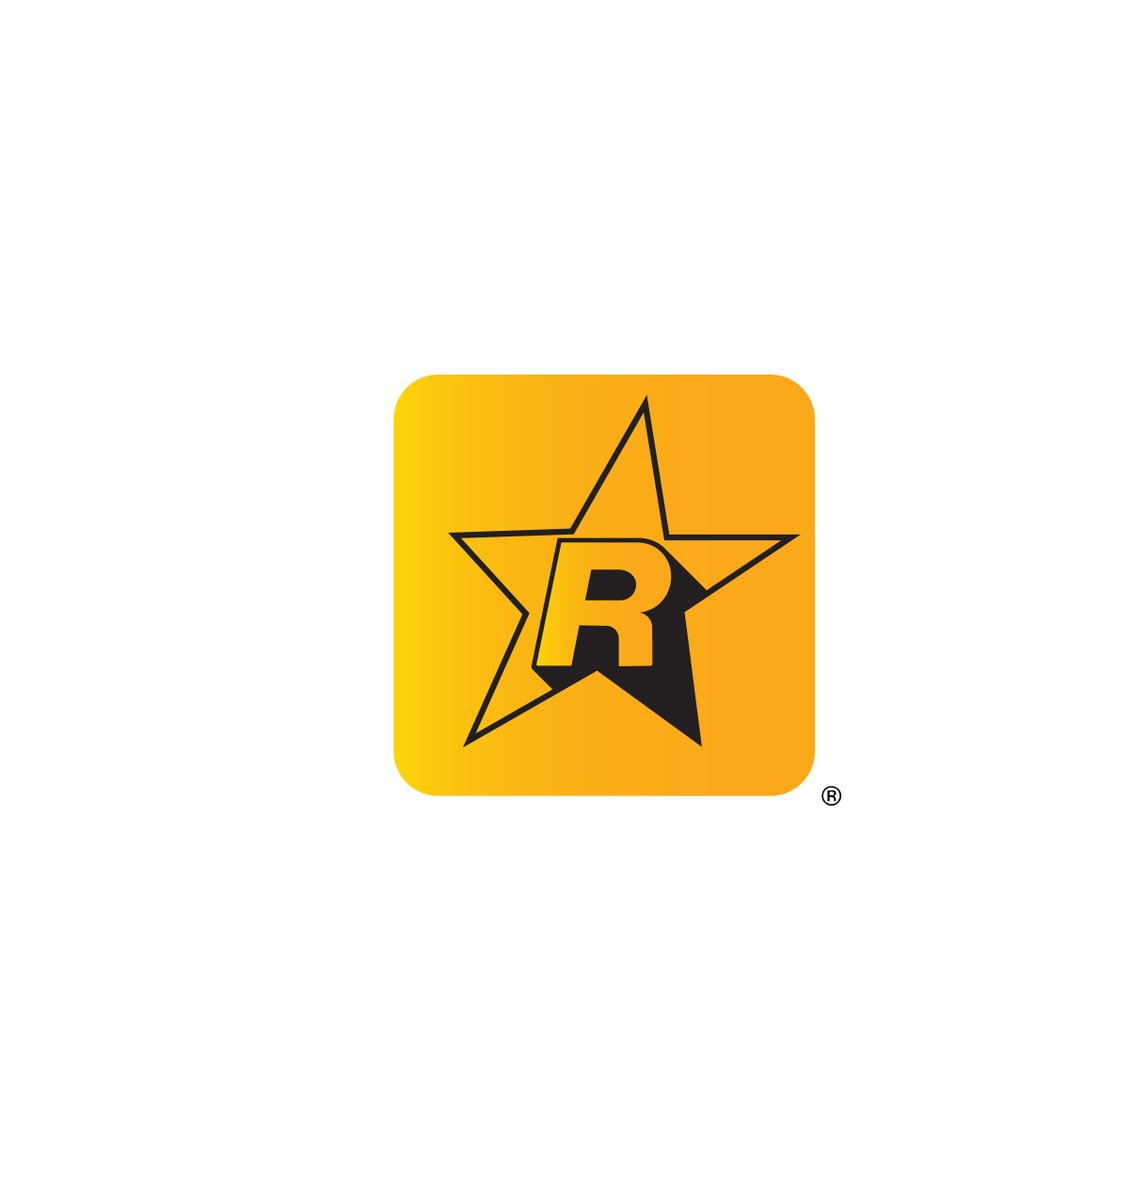 ROCKSTAR GAME rebrand

If you have a problem or you need help with your packaging or logo ,shoot me a DM

Feedback is welcome

#minimalistlogo #dribbble #logodesigner #logo #opticalillusions #3D #effect #LogoDesign #monogramlogo #RockstarGames